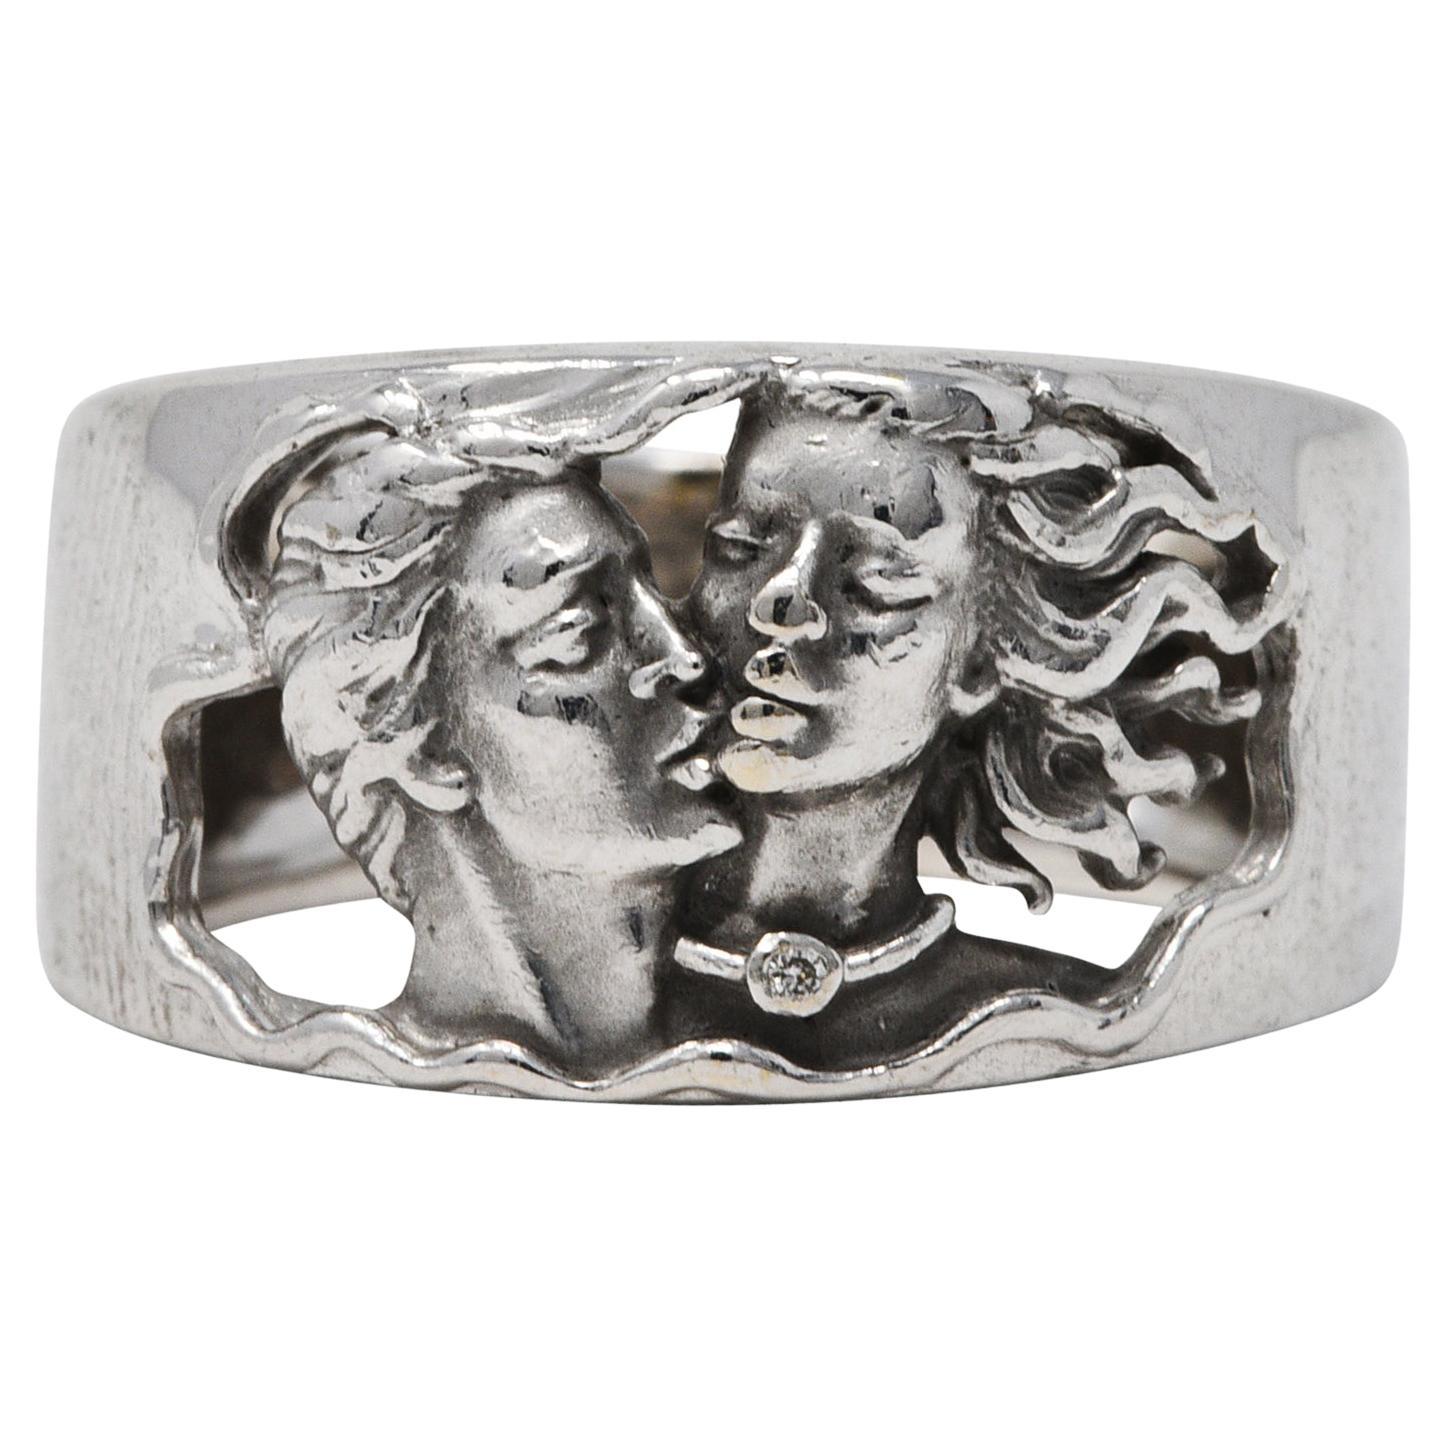 Wide band ring is pierced to front with a depiction of Adam affectionately kissing Eve

Highly rendered with a round brilliant cut diamond accent

Tested as 18 karat gold

Numbered with maker's mark

From the contemporary Adam & Eve collection

Ring